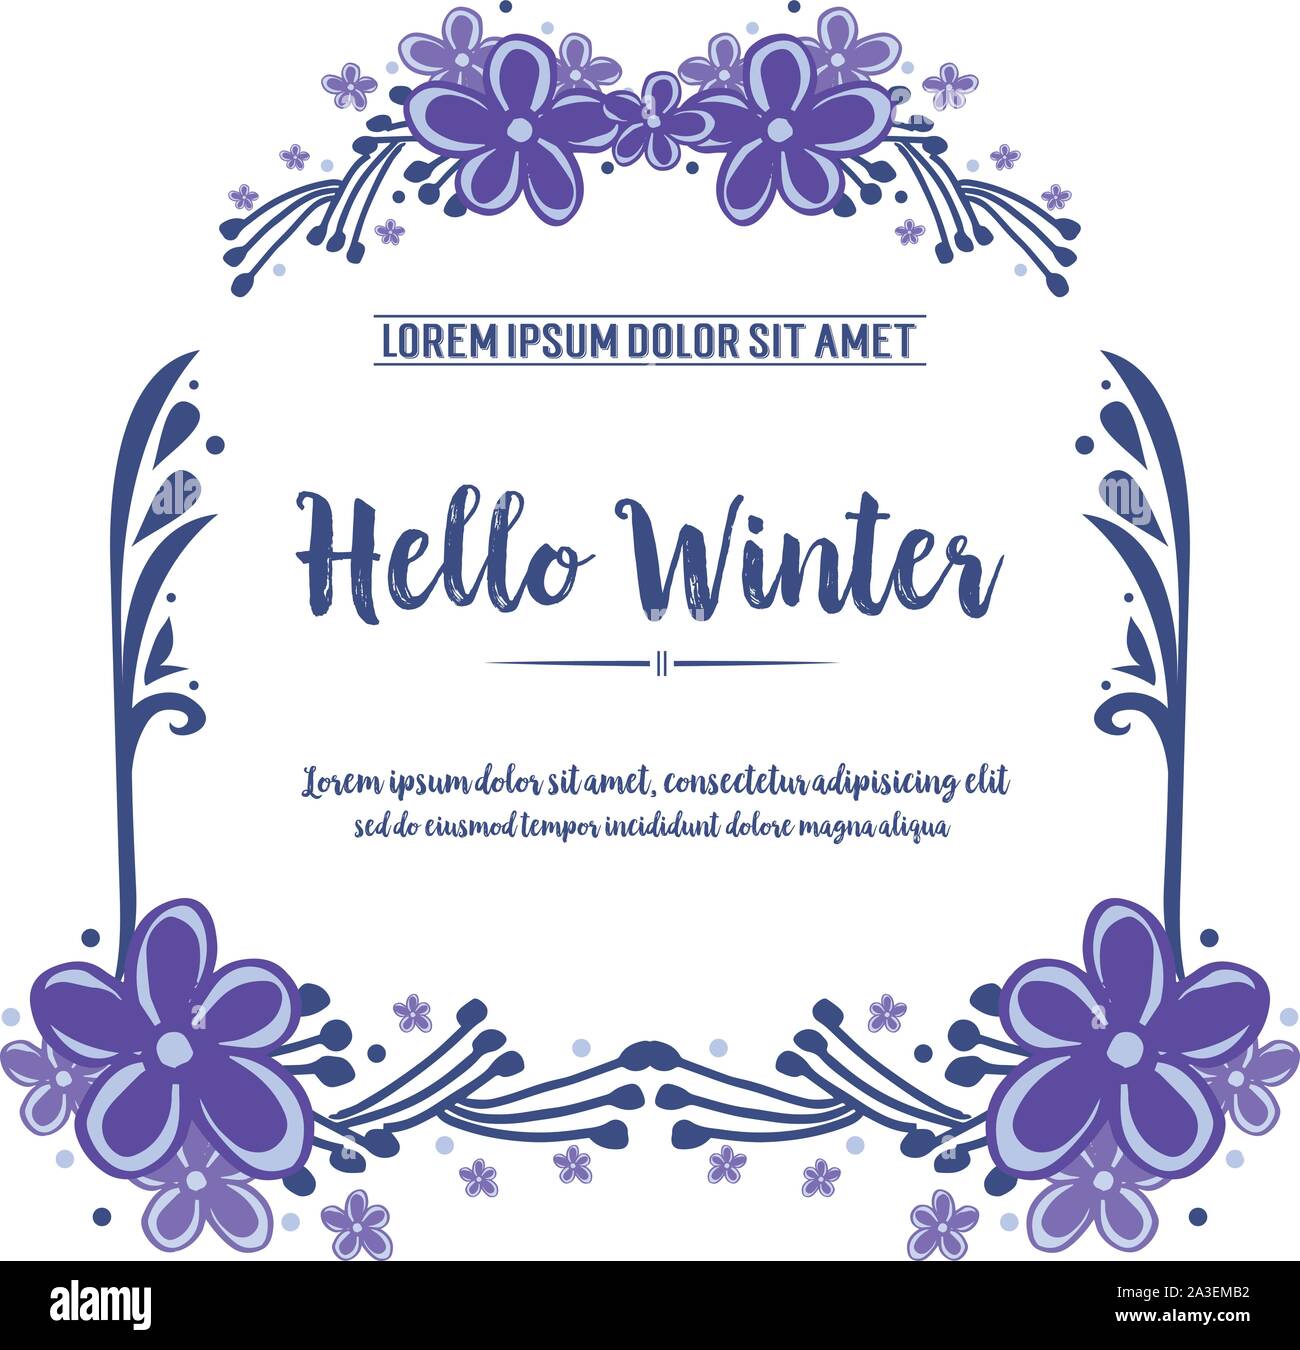 Wallpaper of card hello winter, with design drawing of purple wreath frame. Vector Stock Vector